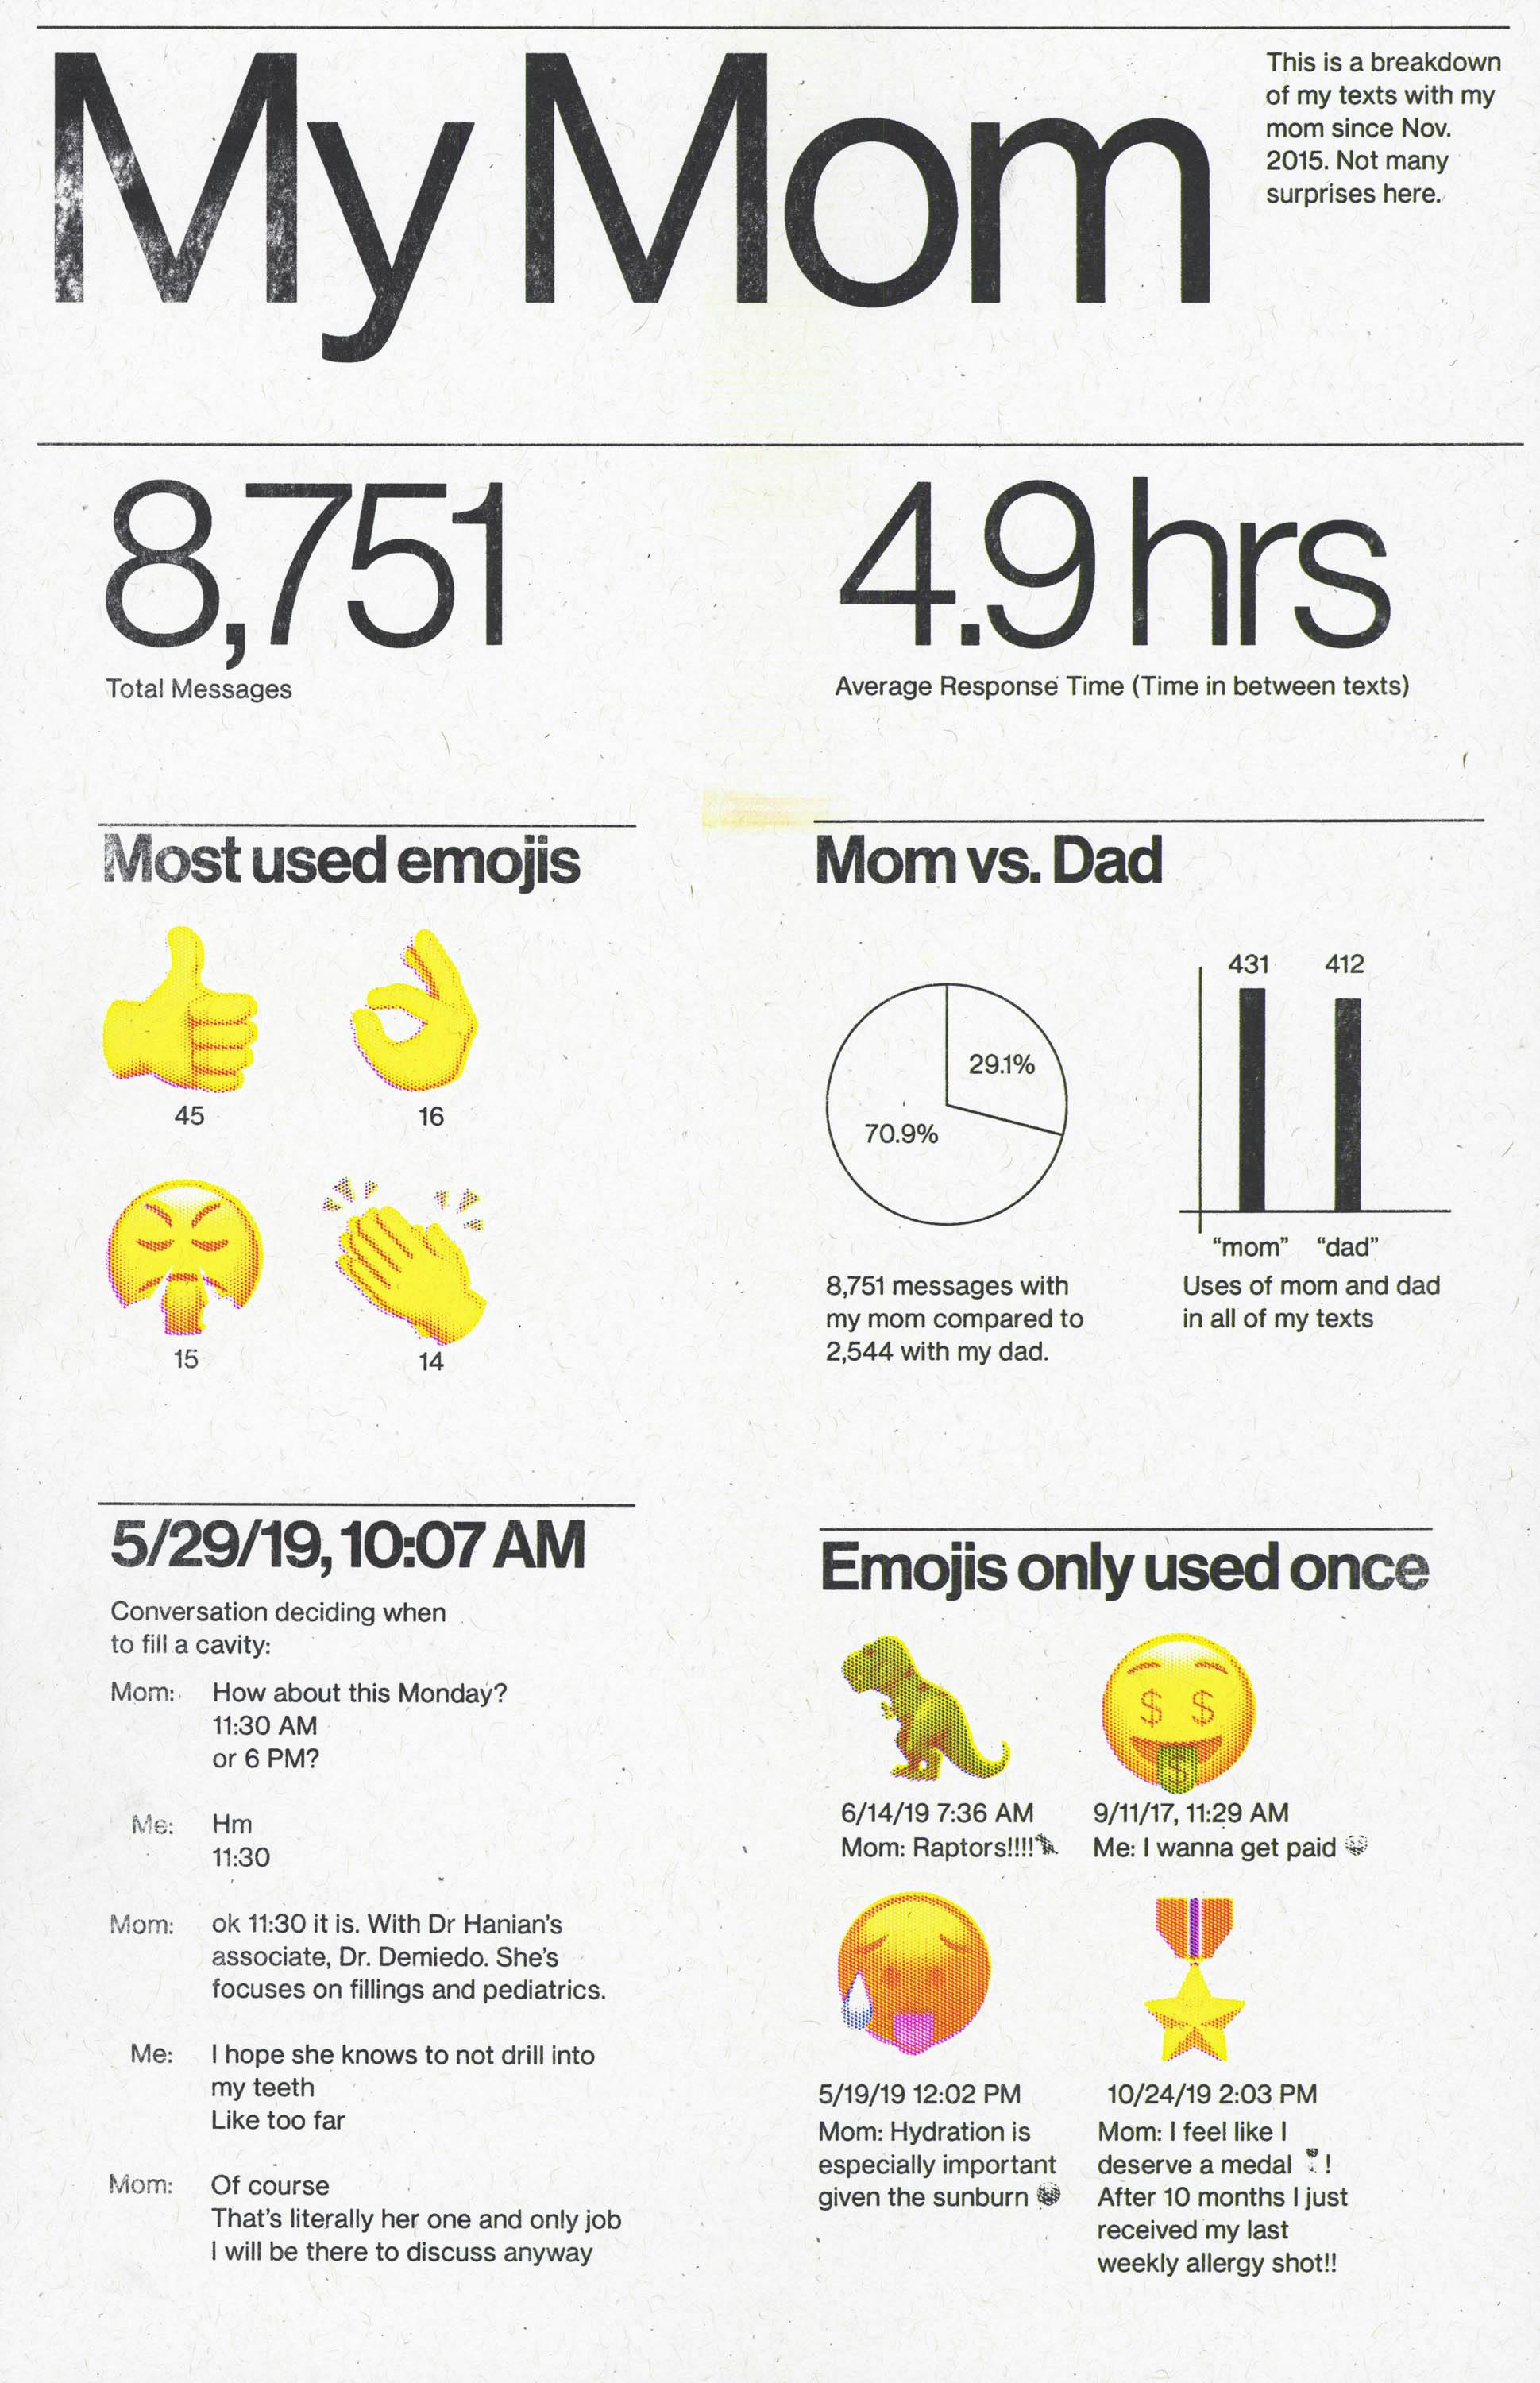 Infographic titled "My Mom" showing communication statistics with mom. Indicates 8,751 messages and most used emojis in conversations. Also has a section comparing "Mom vs. Dad" texting.